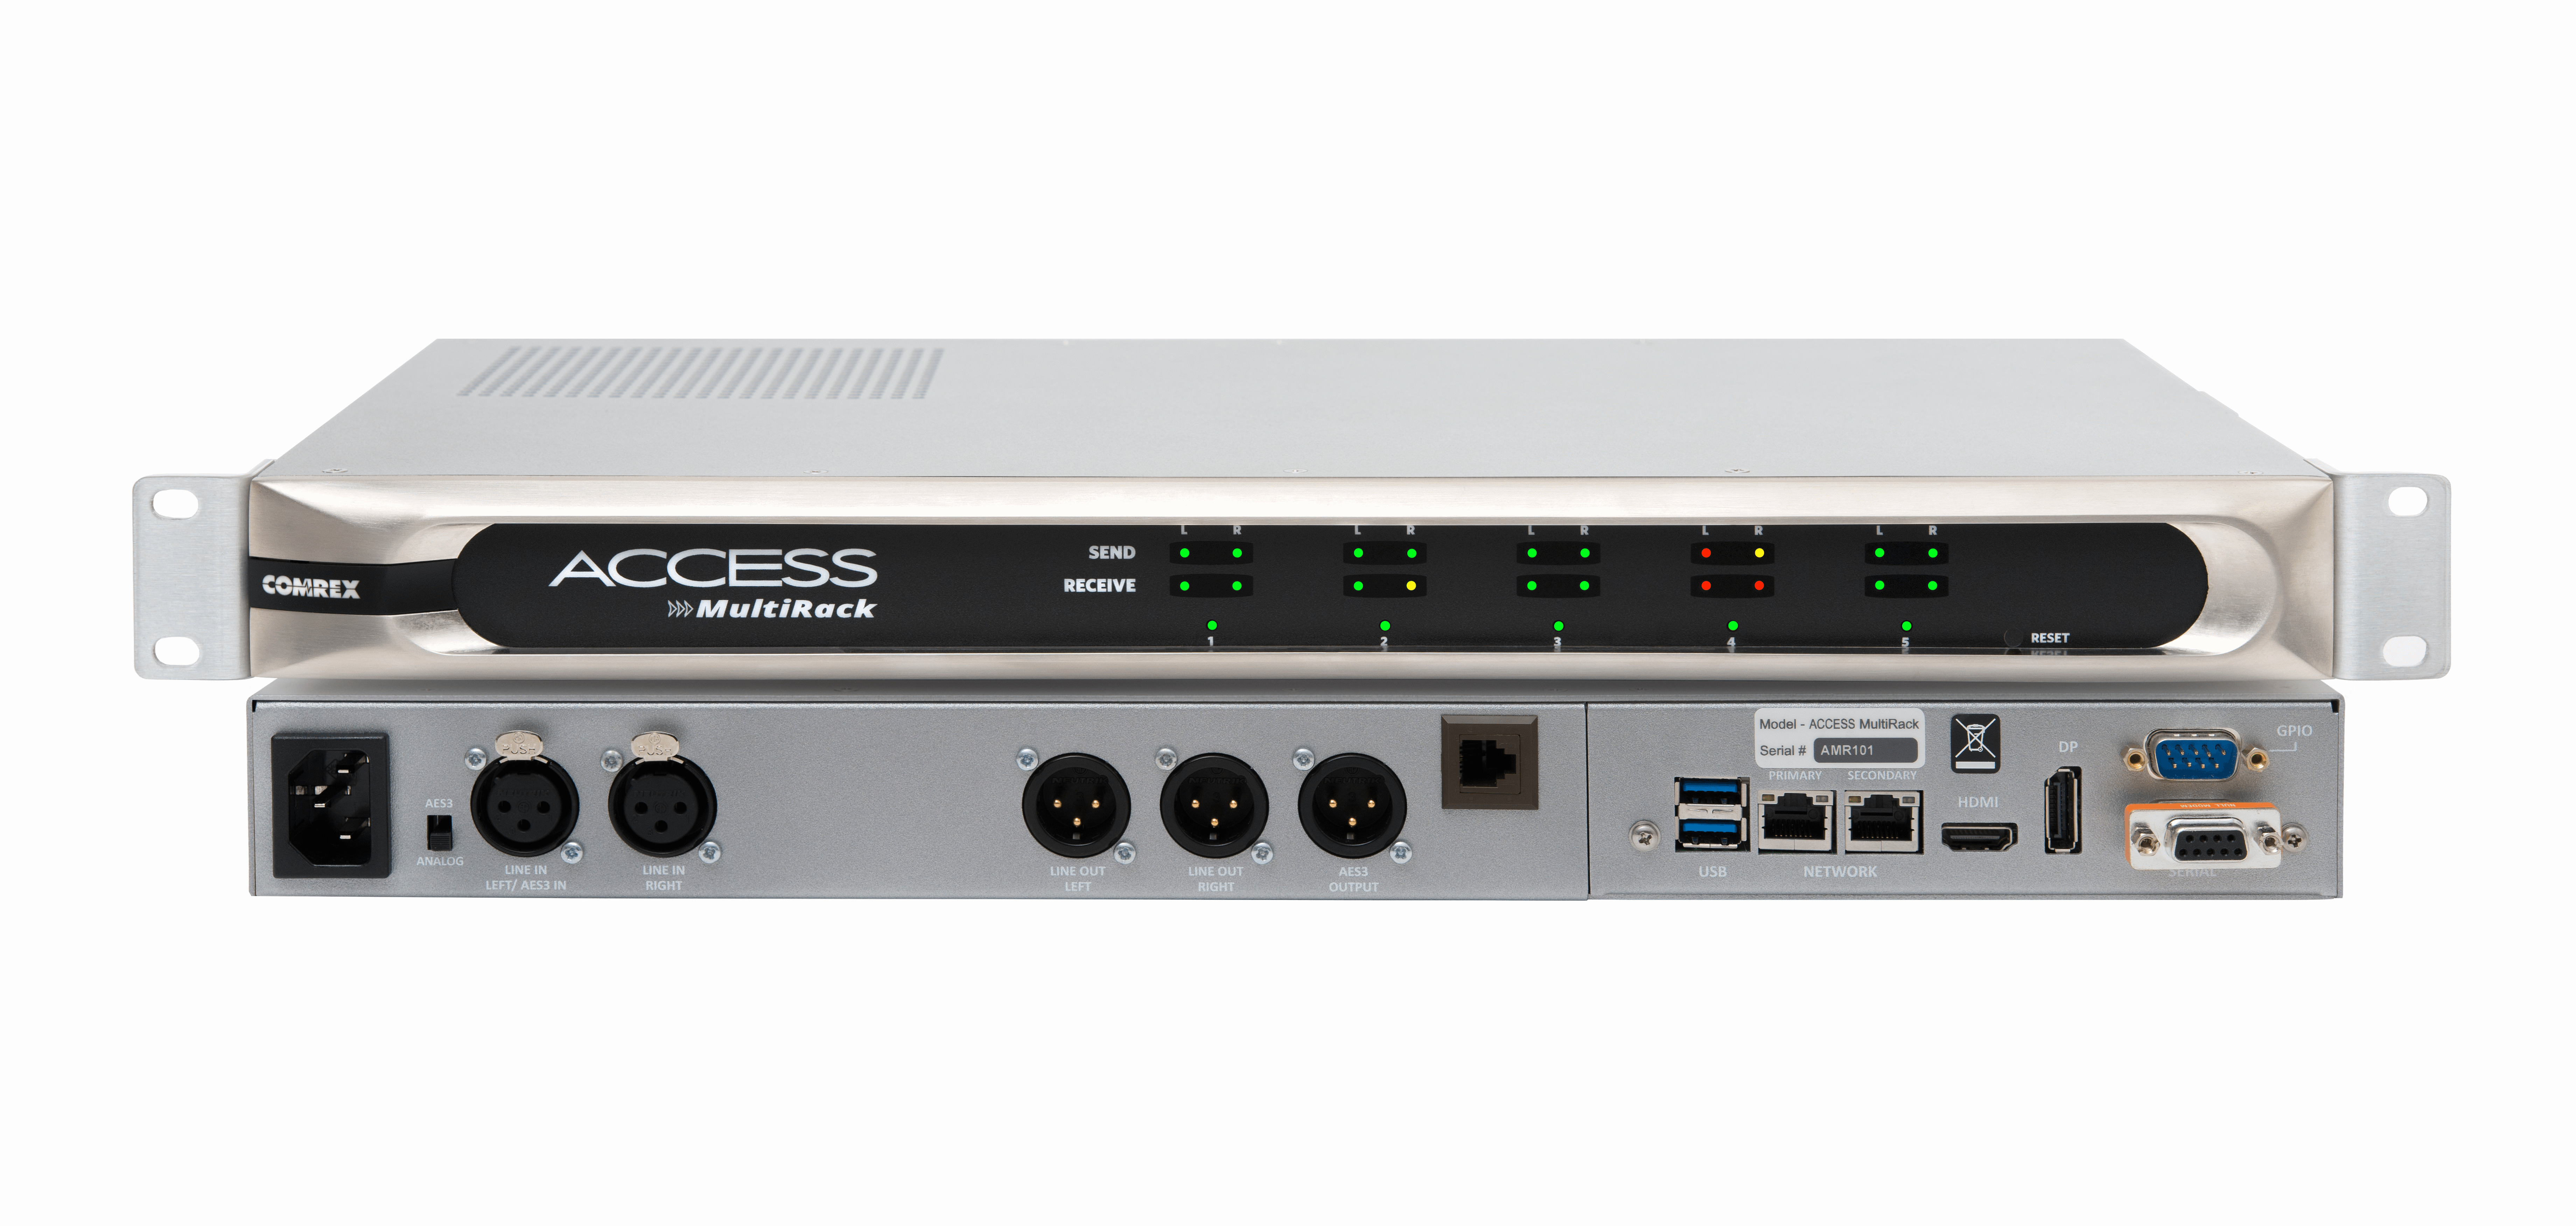 Comrex ACCESS MultiRack stack product photo with front and rear displayed